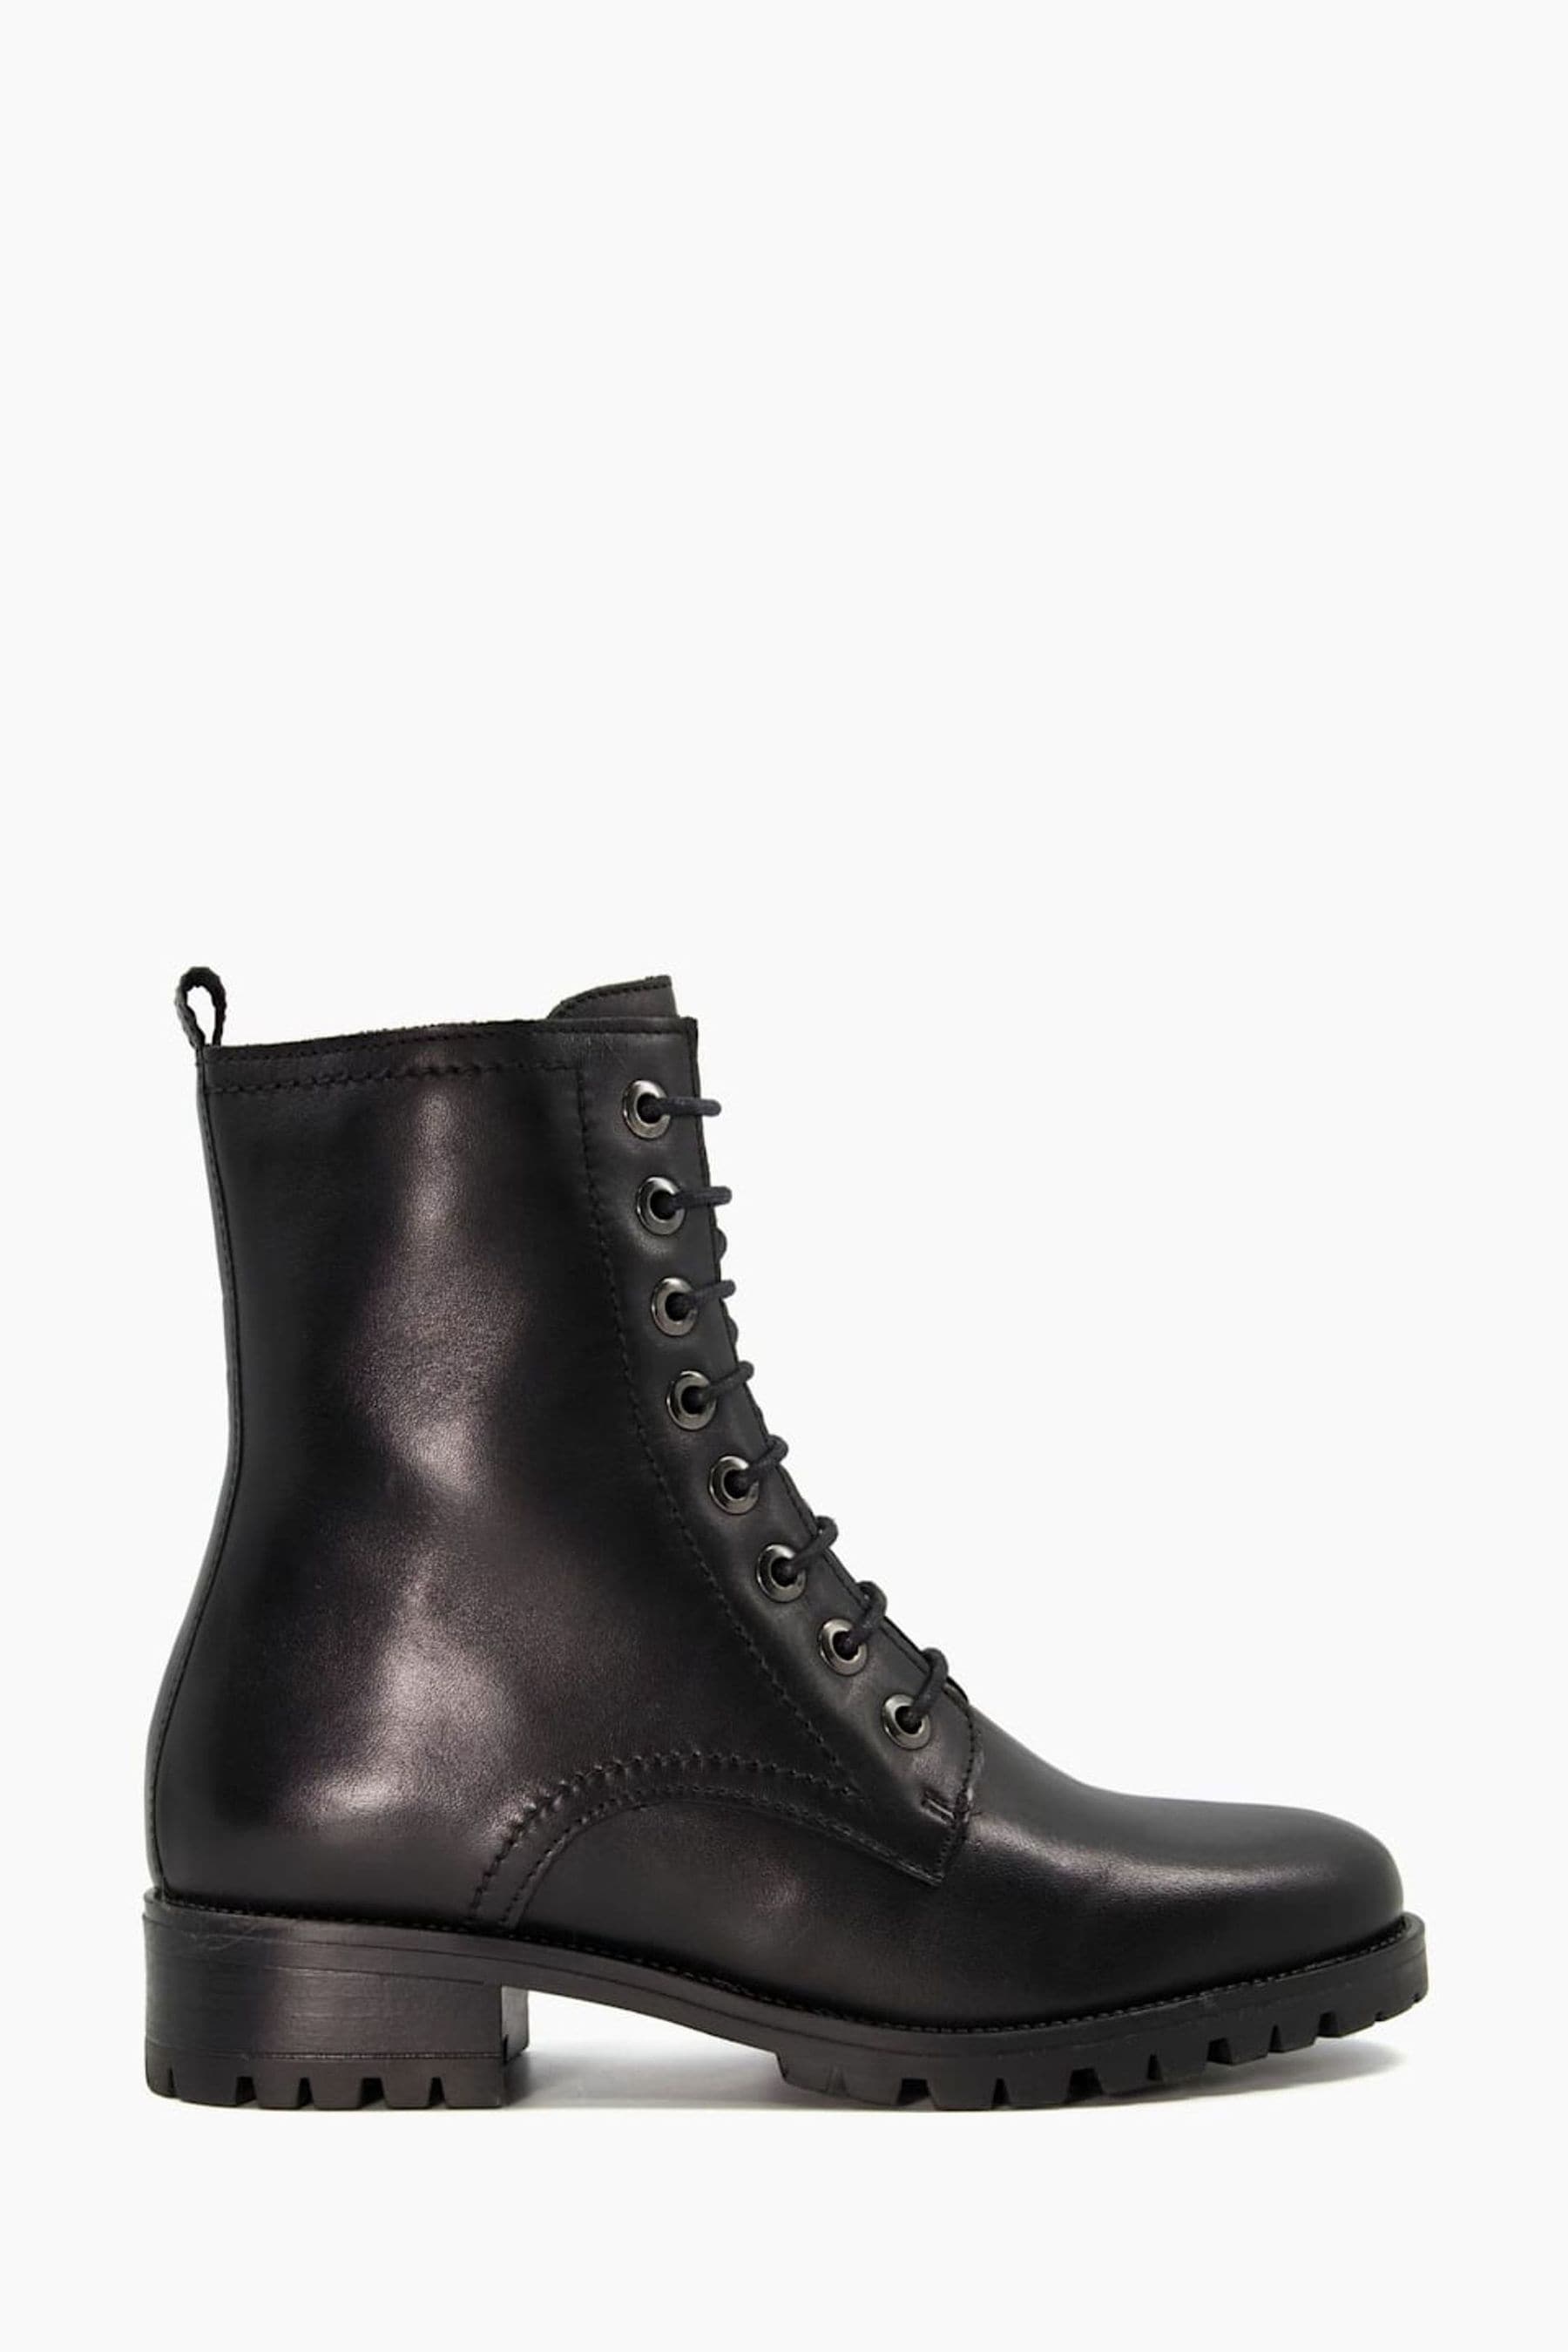 Buy Dune London Black Prestone Cleated Sole Lace-Up Hiker Boots from ...